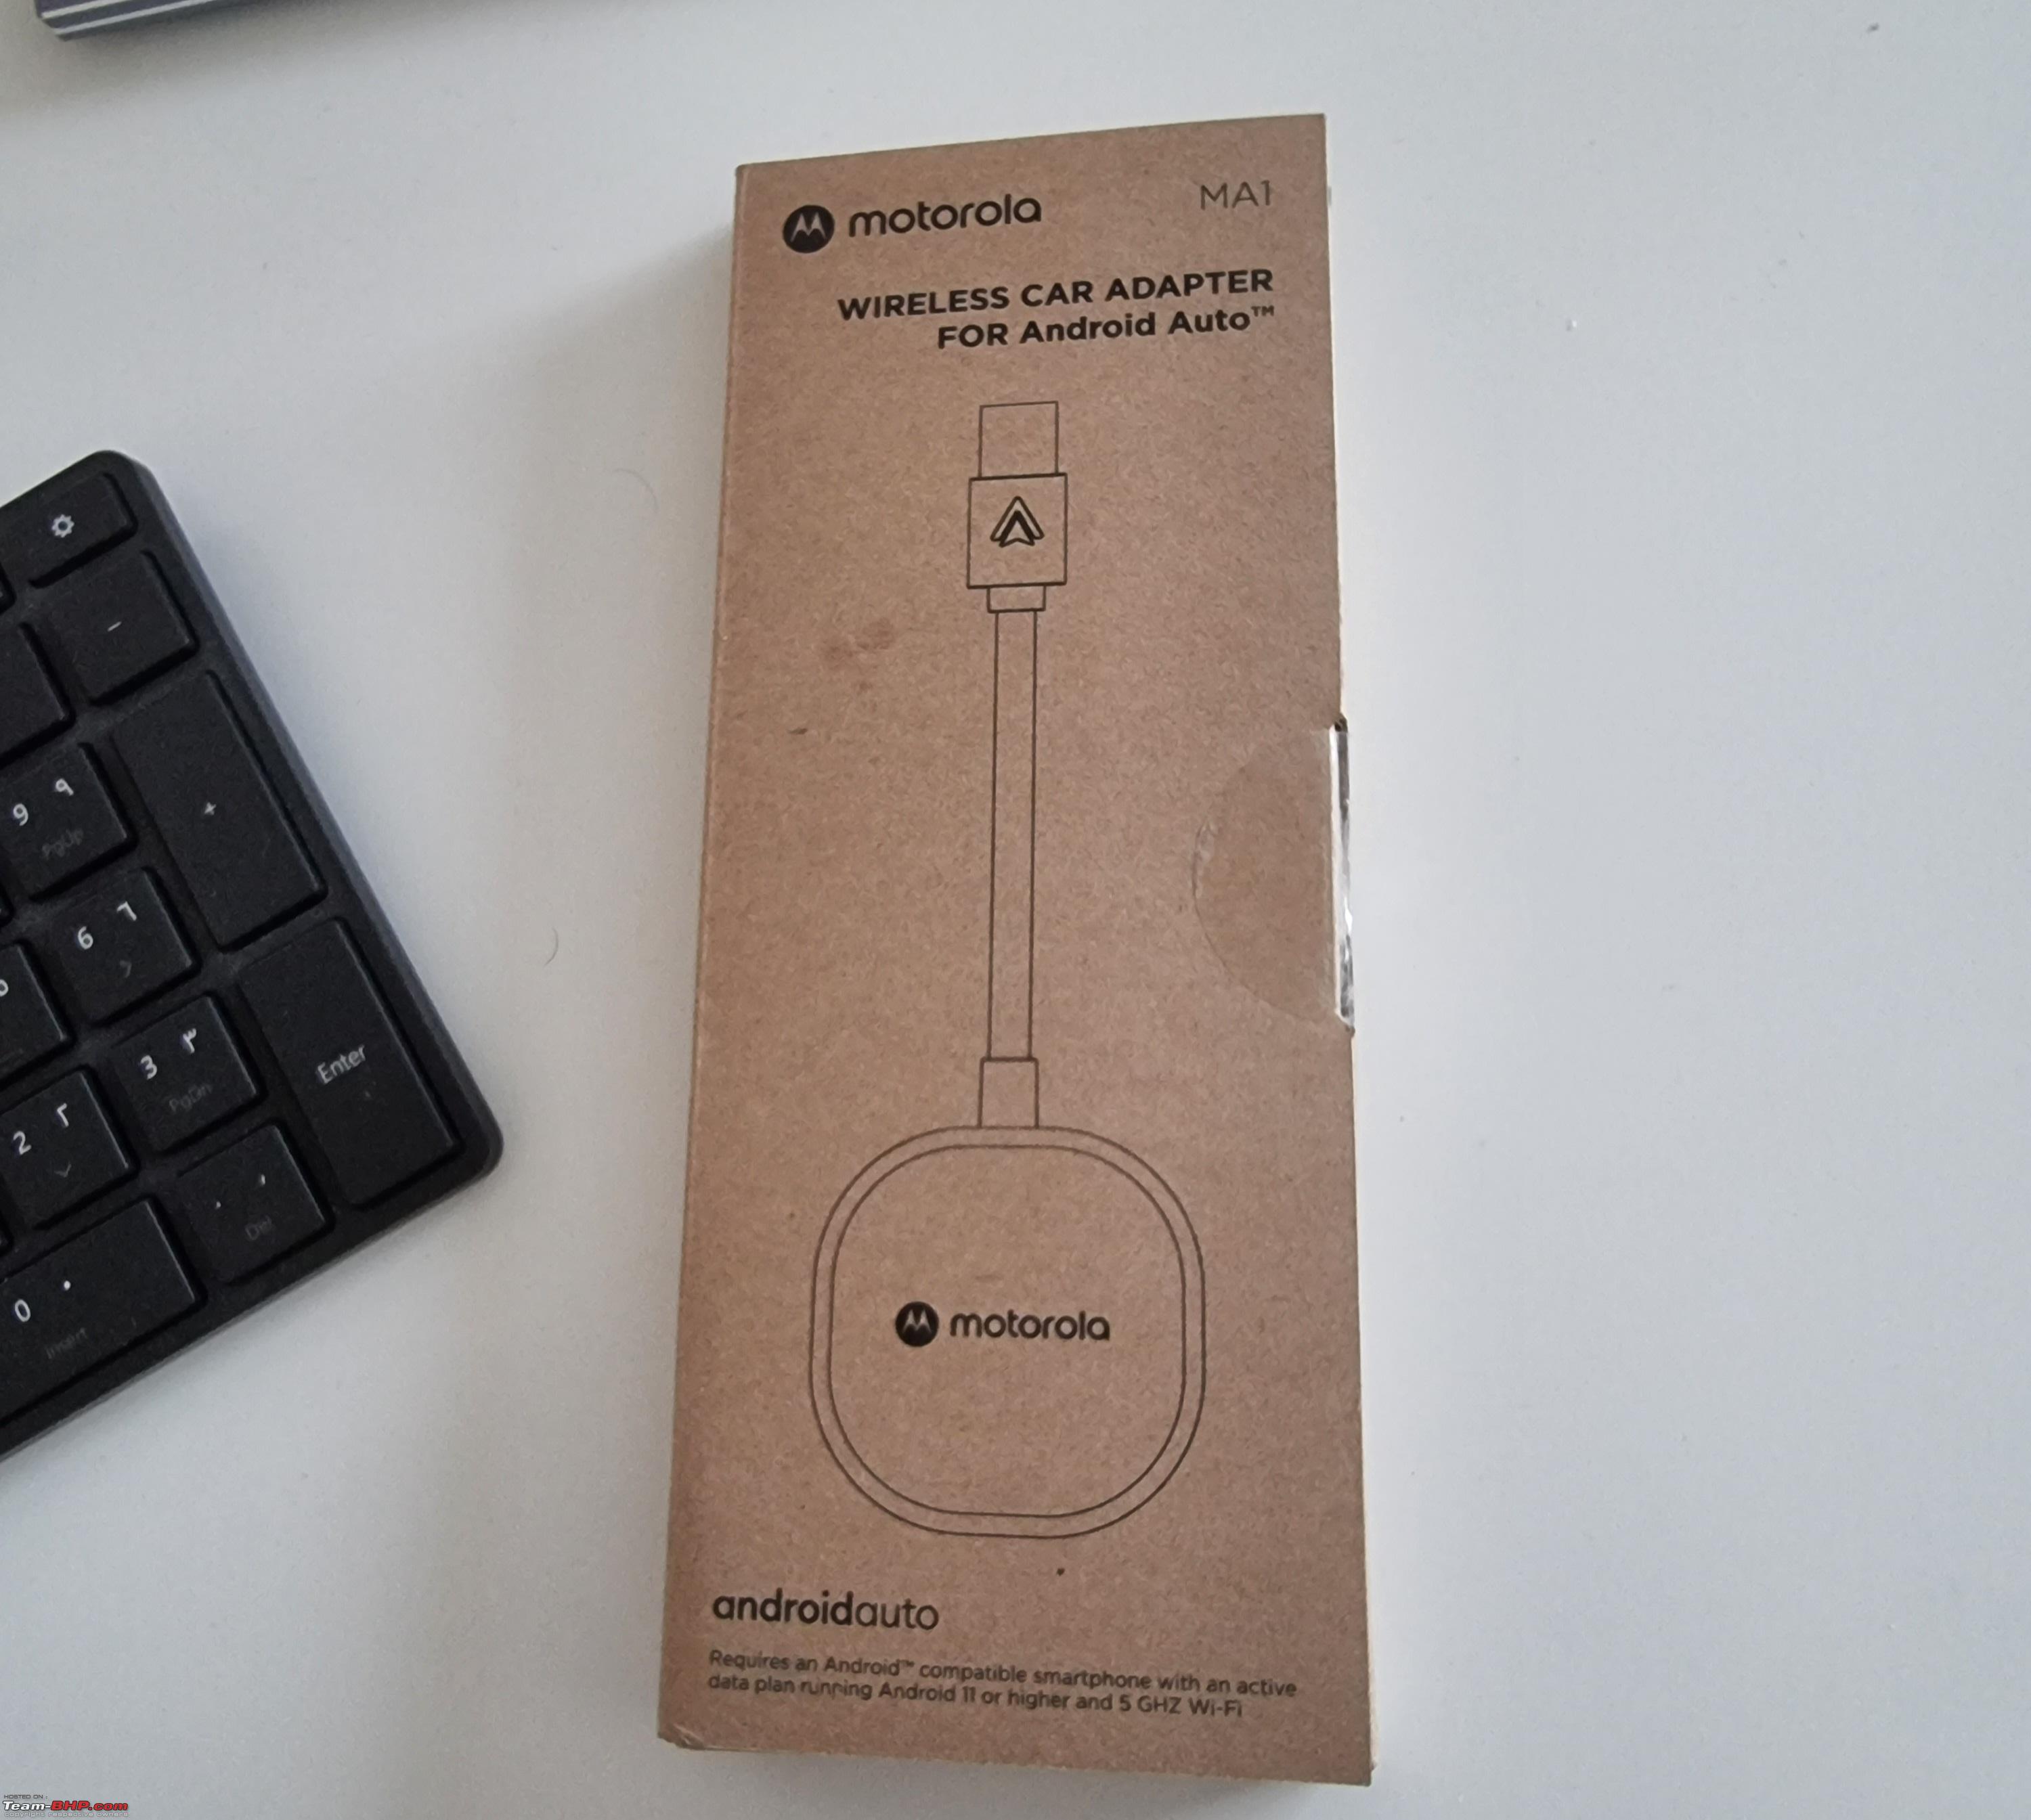 Motorola MA1 Wireless Android Auto Car Adapter - Instant Smartphone to Car  Screen Connection 